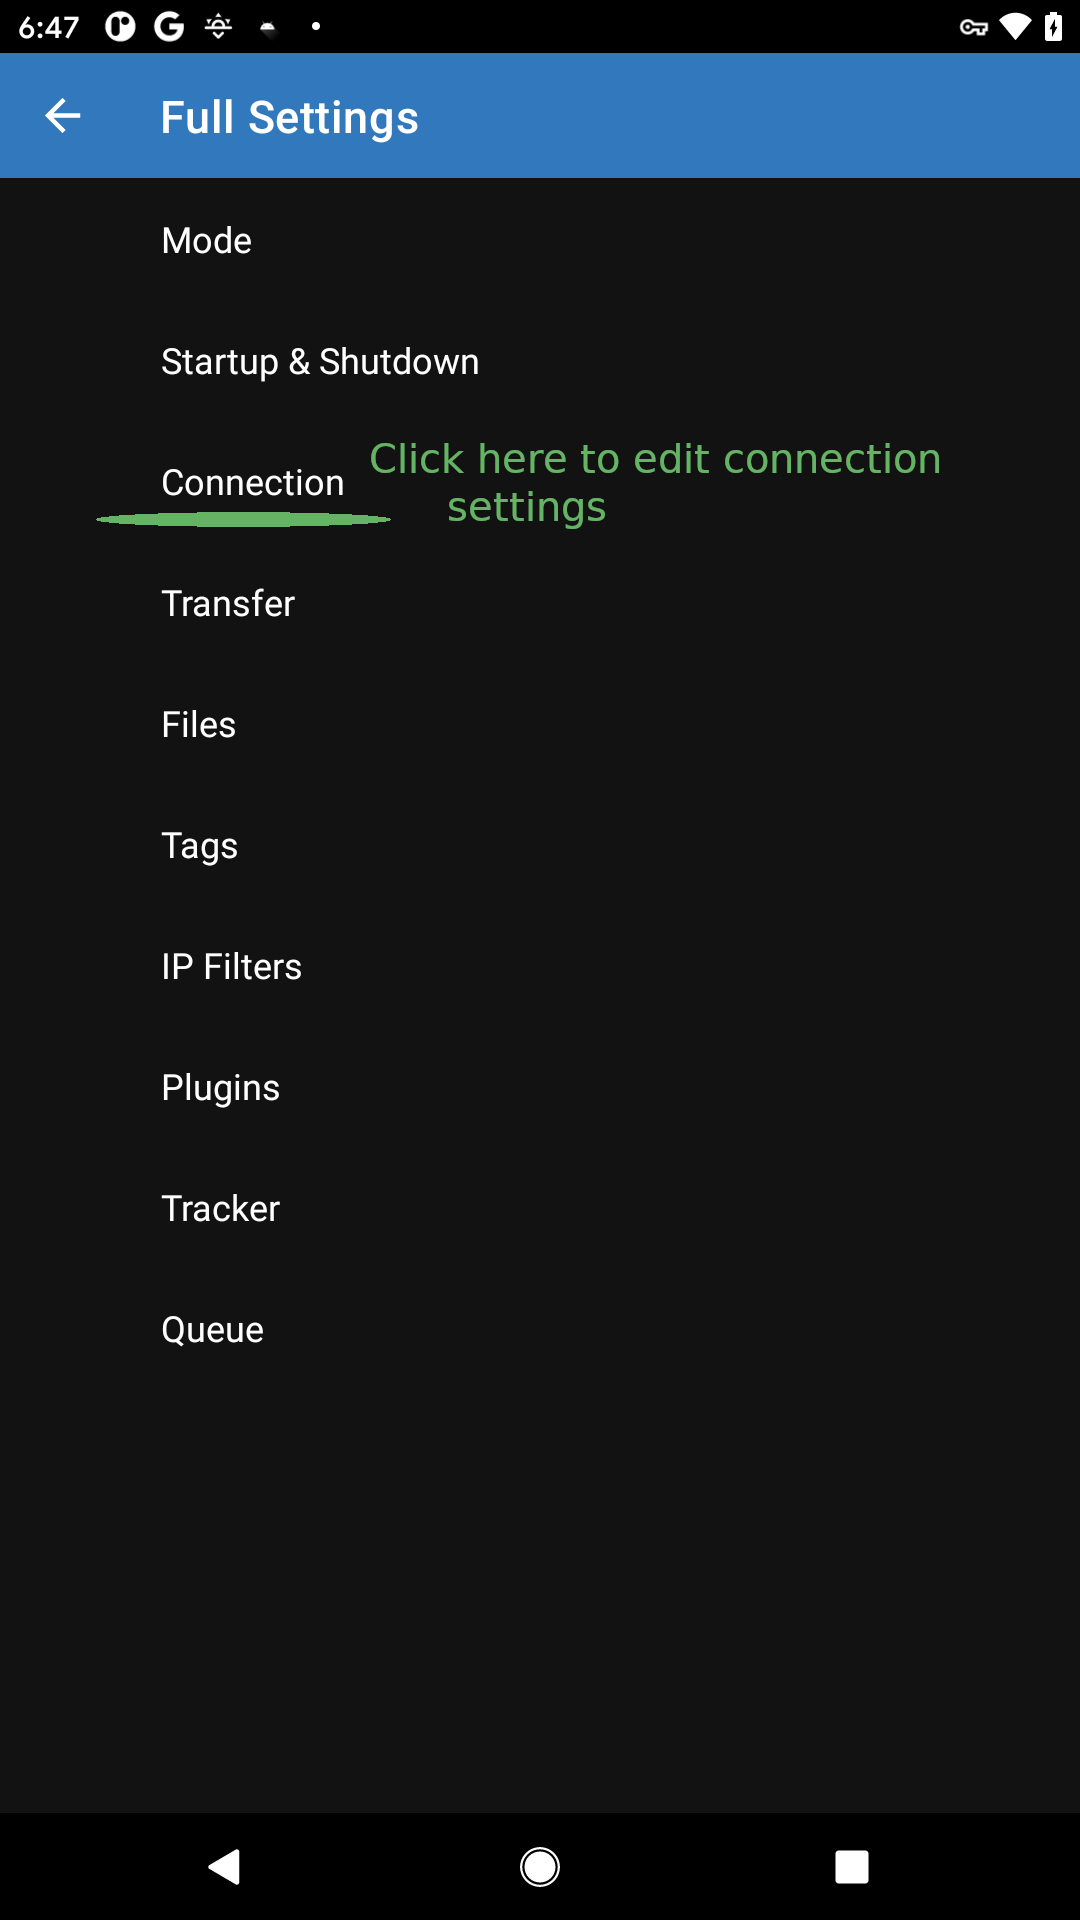 Open Connection Settings